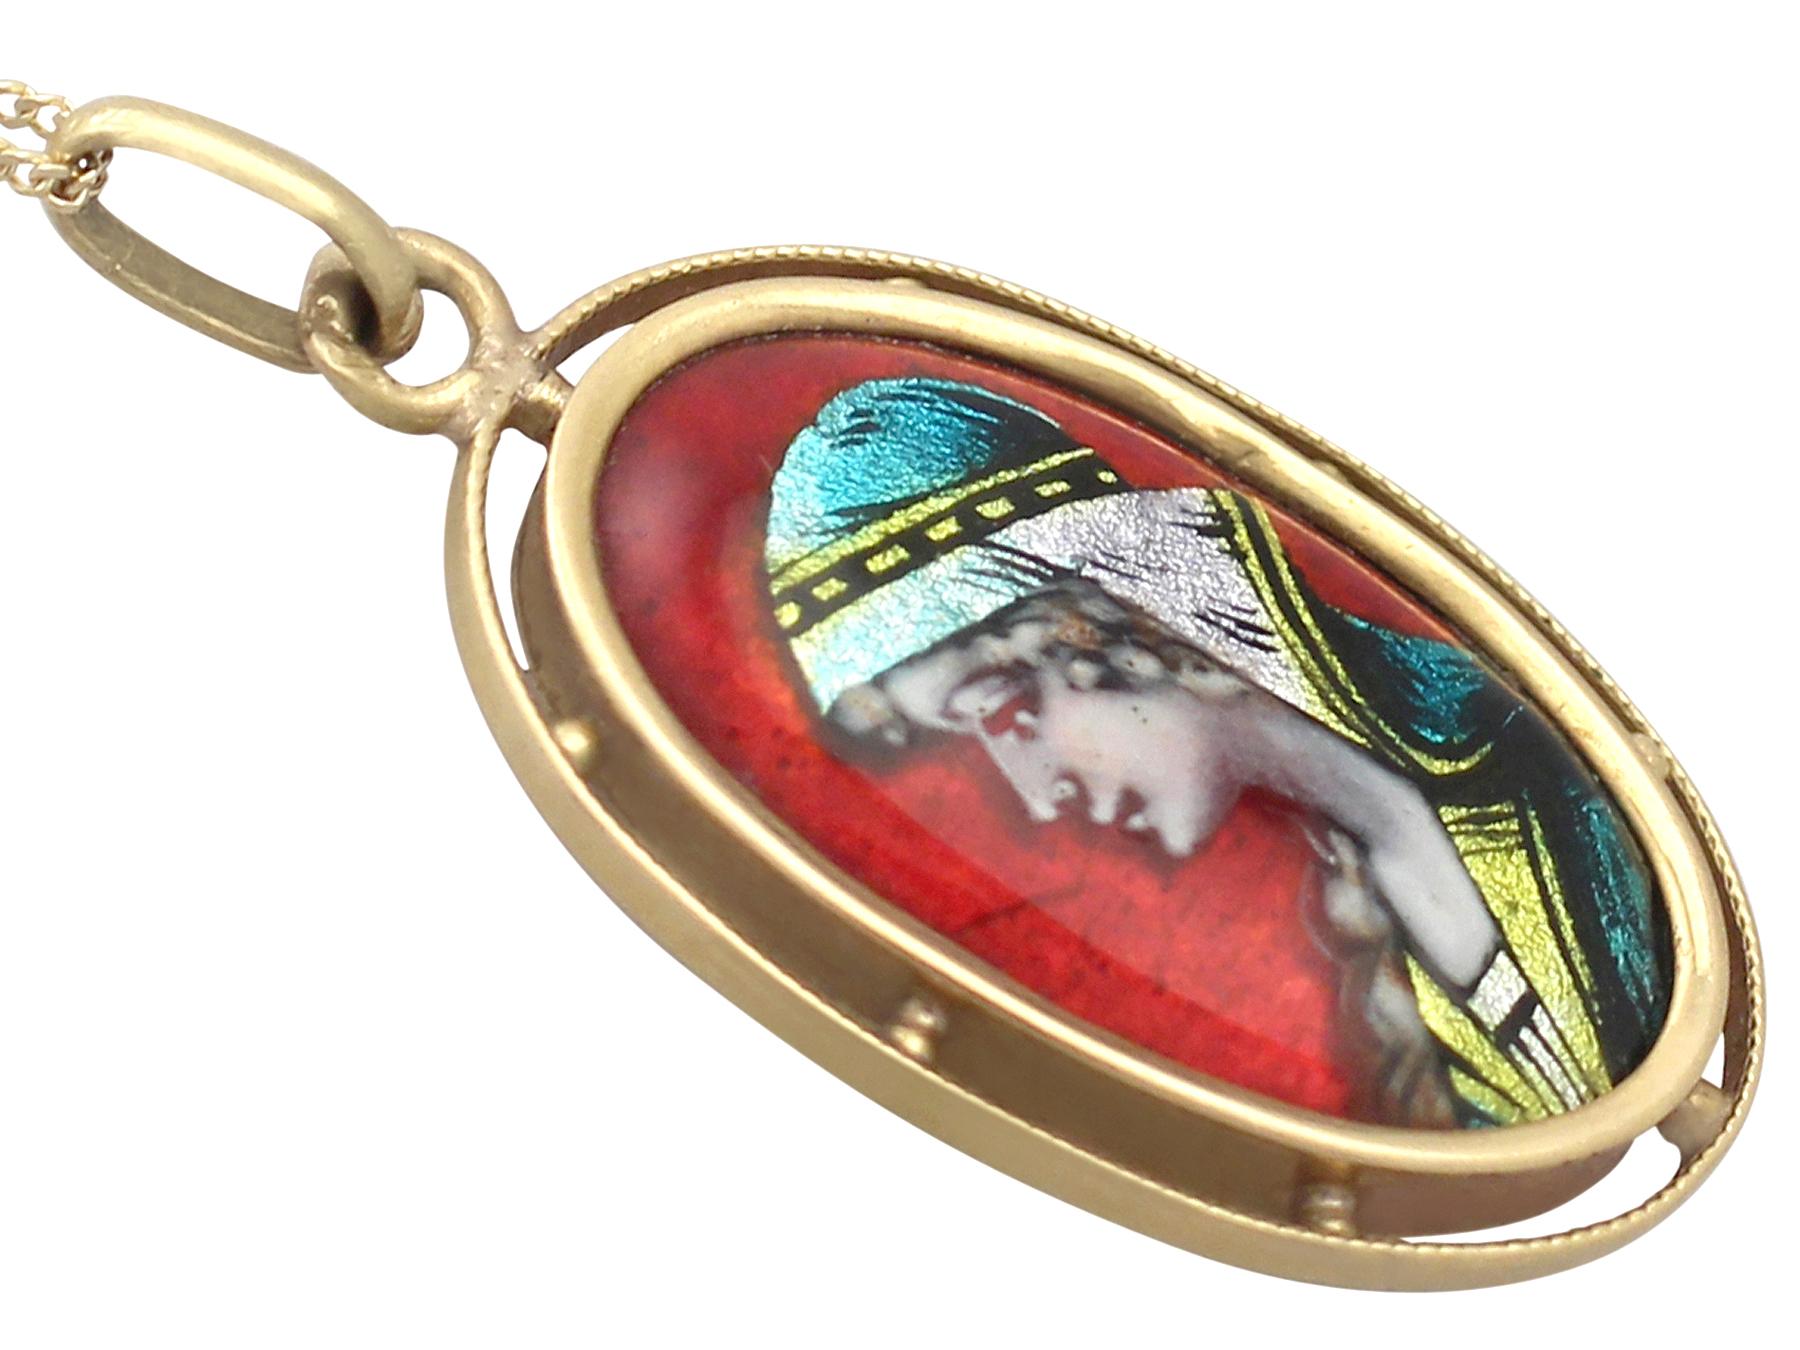 Antique French Enamel and Yellow Gold Pendant In Excellent Condition For Sale In Jesmond, Newcastle Upon Tyne